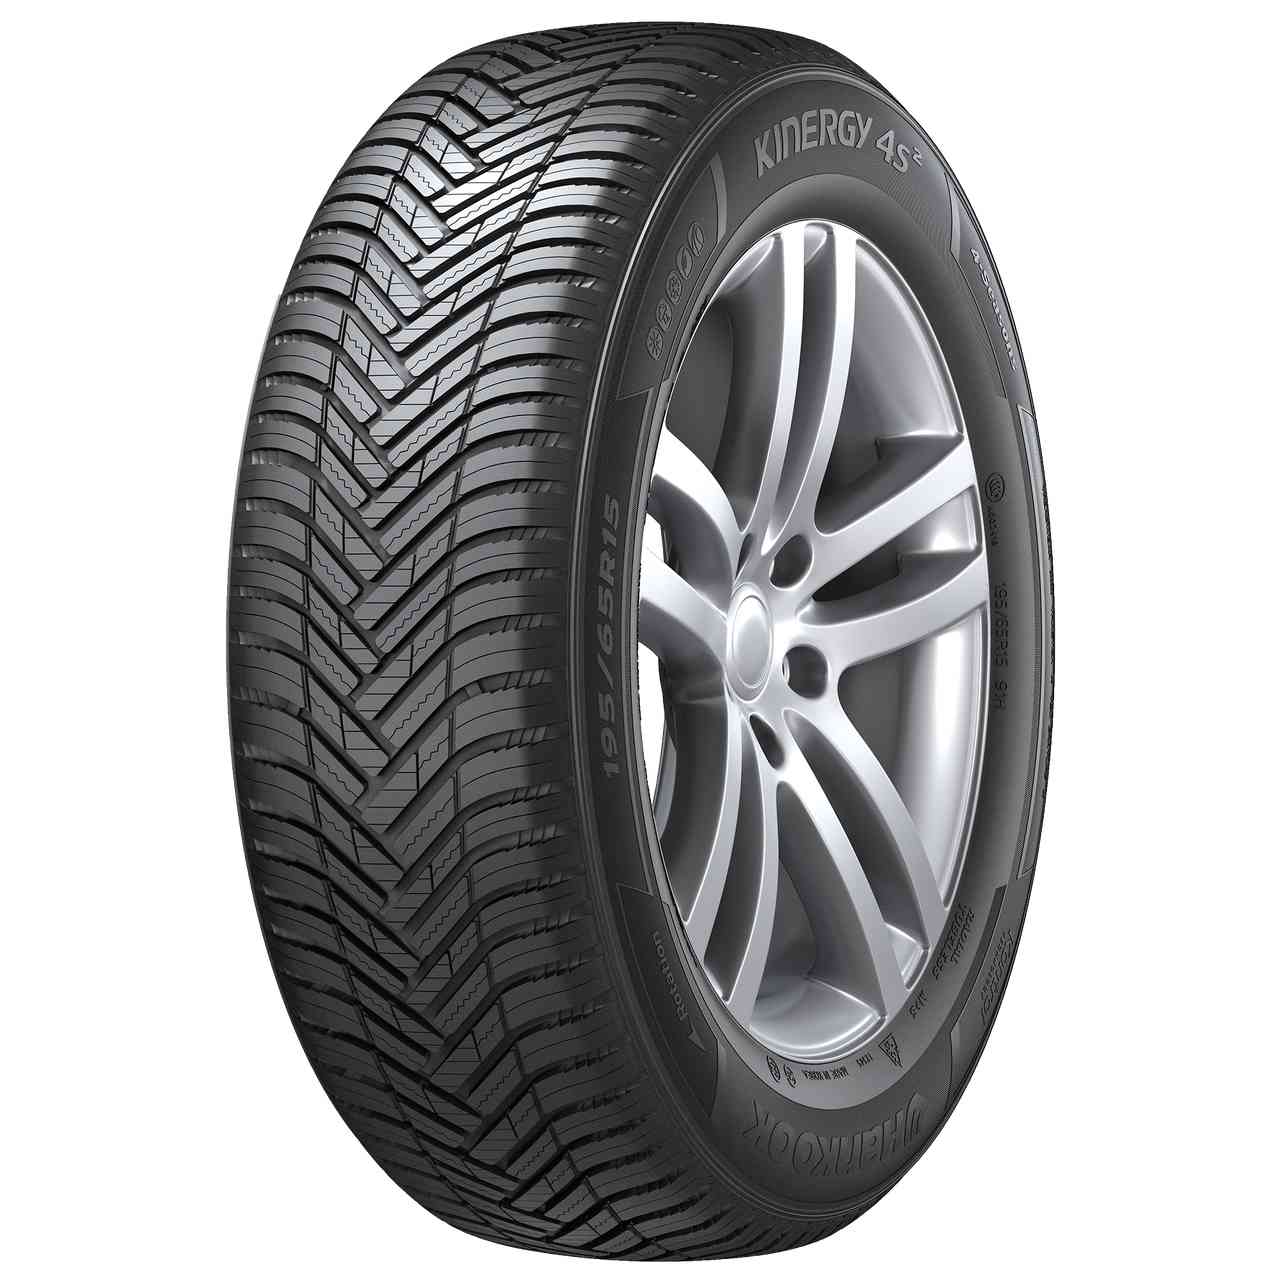 HANKOOK KINERGY 4S 2 (H750) 205/50R17 93W BSW XL